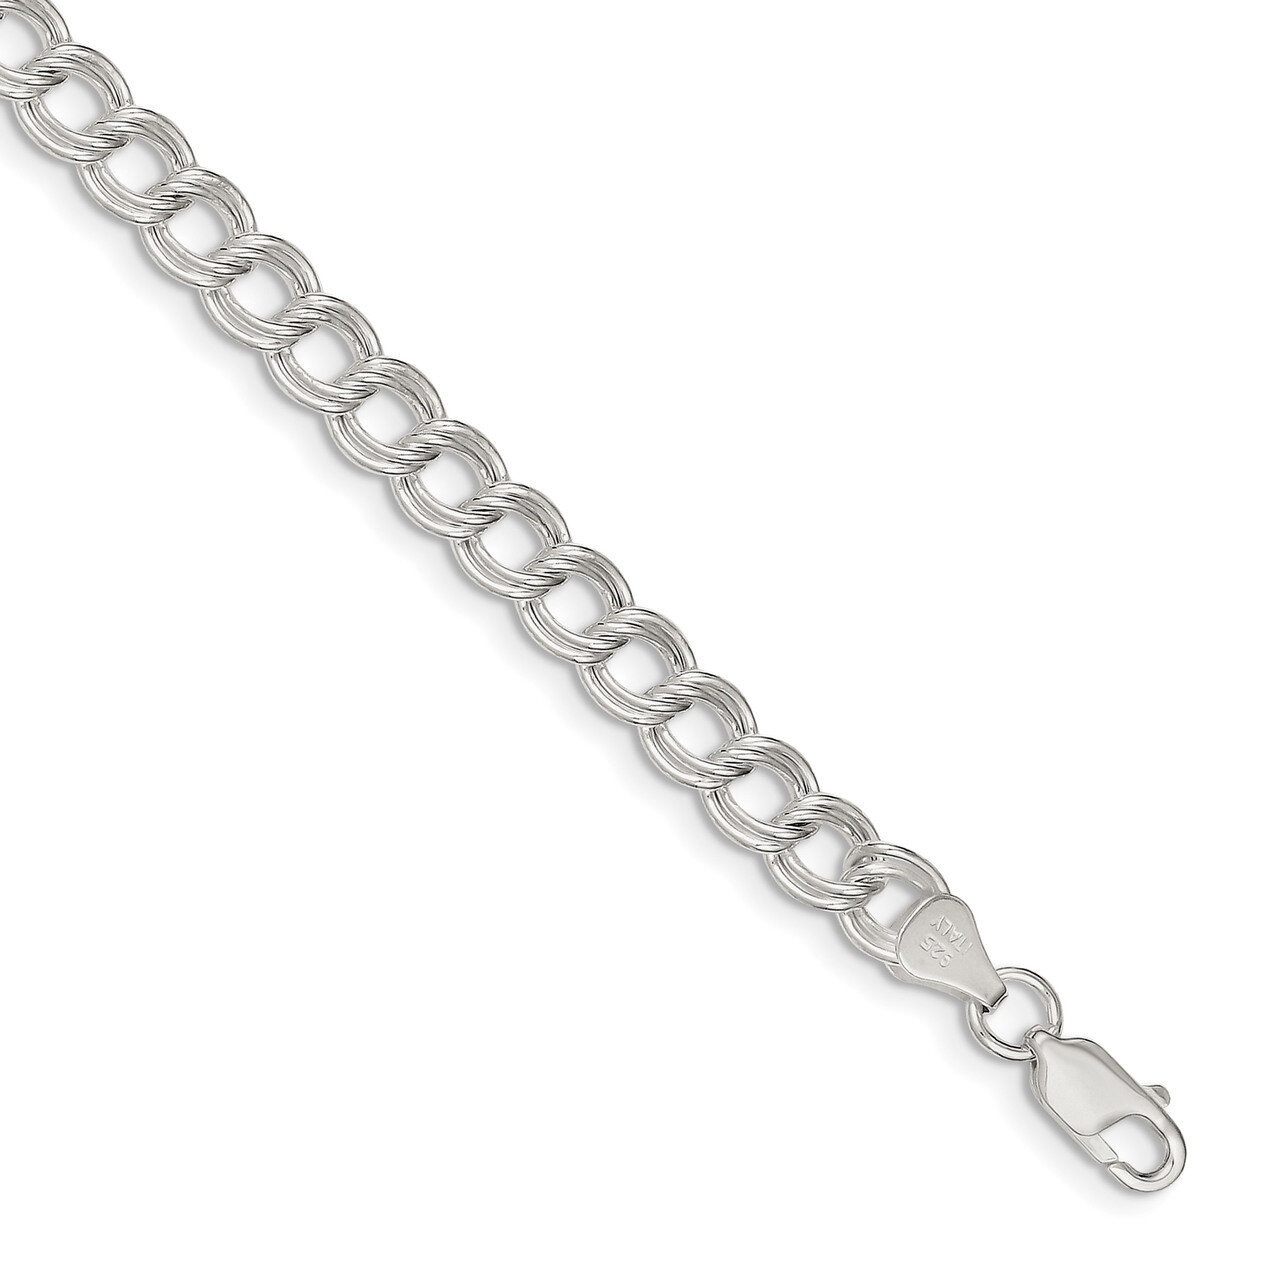 Double Link Charm Bracelet 6 Inch Sterling Silver QCH100-6